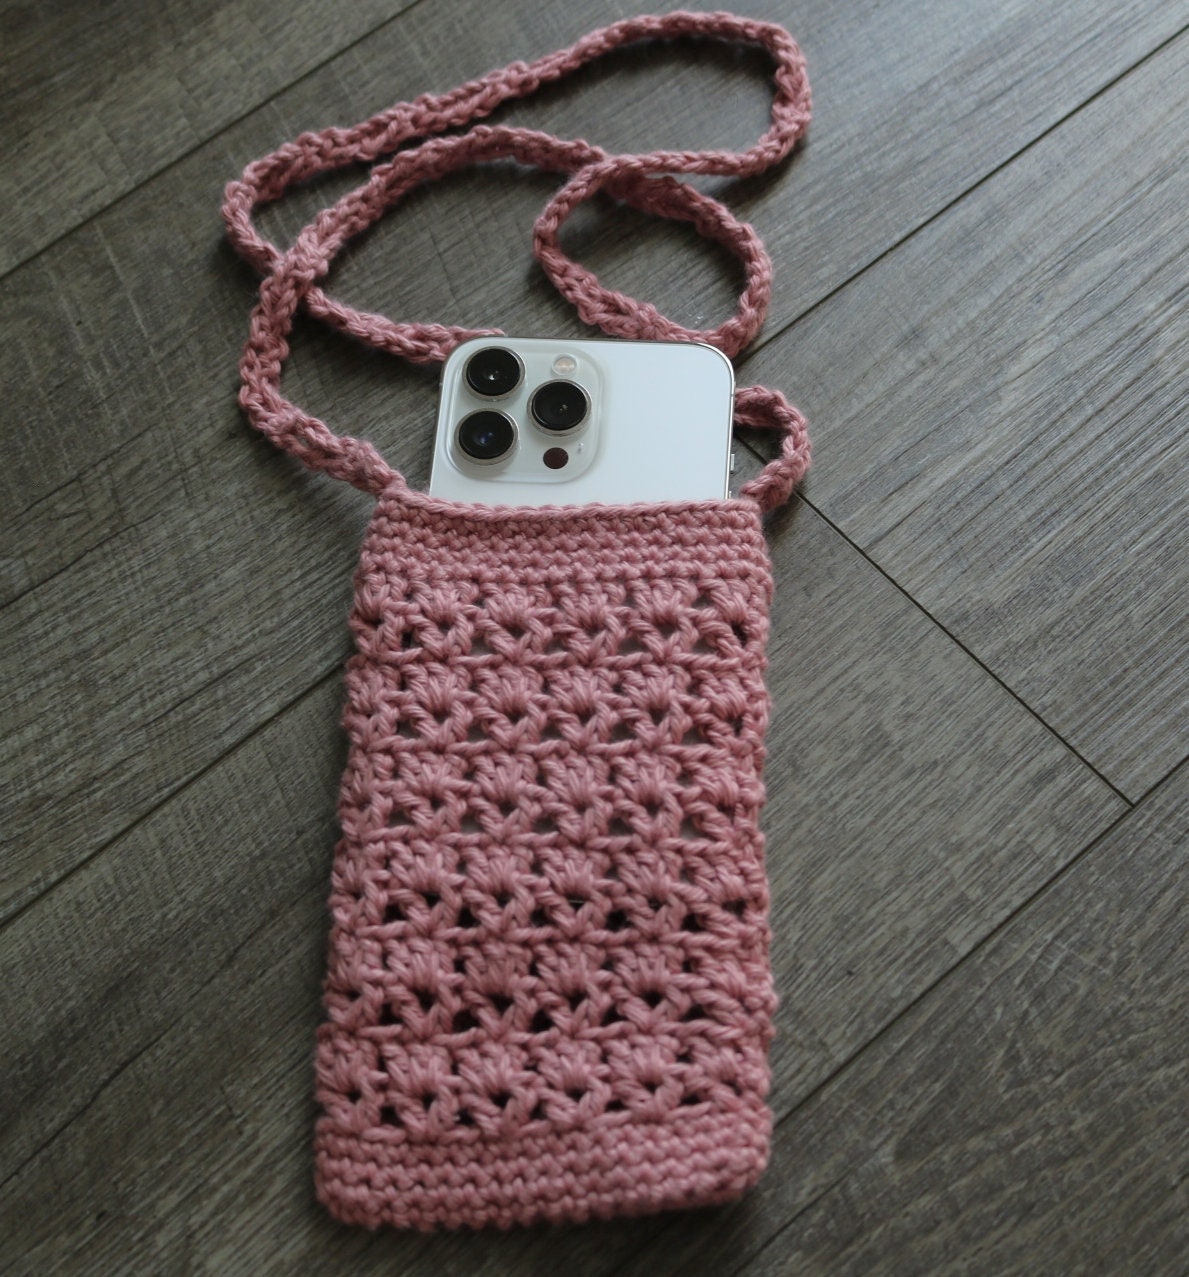 Crochet Cell Phone Bag with Recycled Aluminum Pop-Tops - Black Mini Charm |  NOVICA